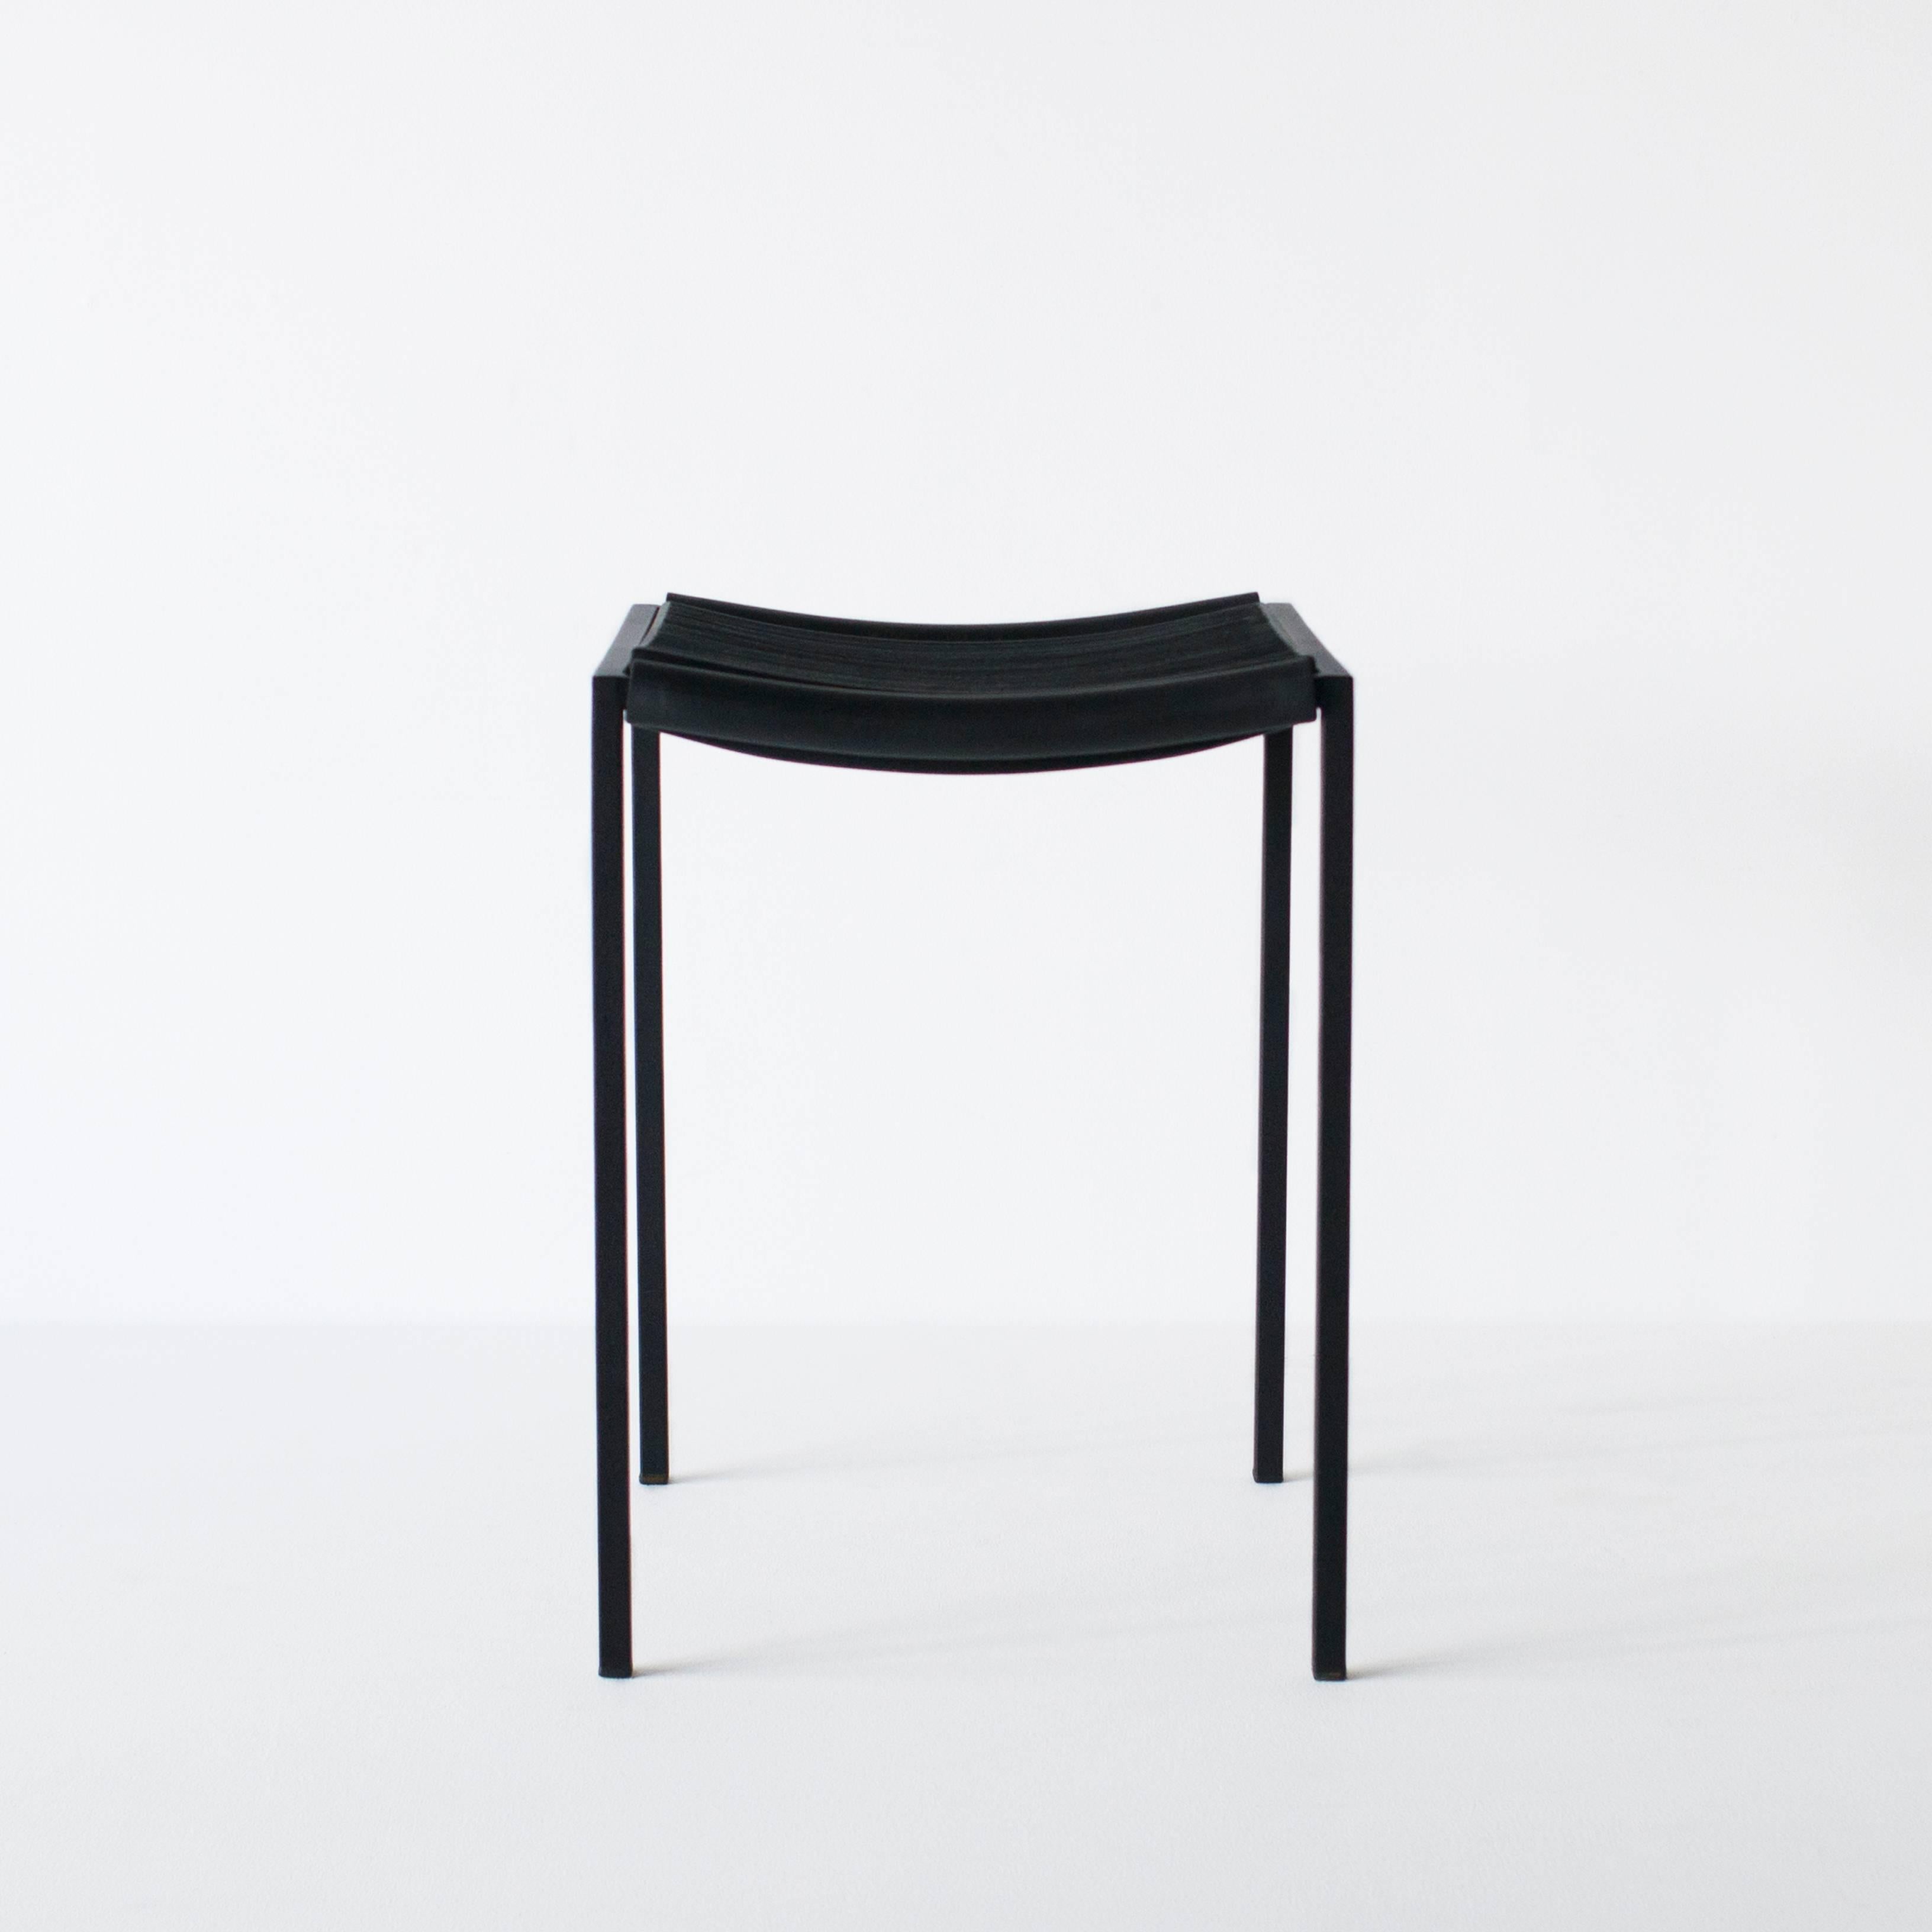 Stool designed by Maurizio Peregalli for Zeus. 
Slender legs with rubber seat. Two pieces available. Price is each one.
 